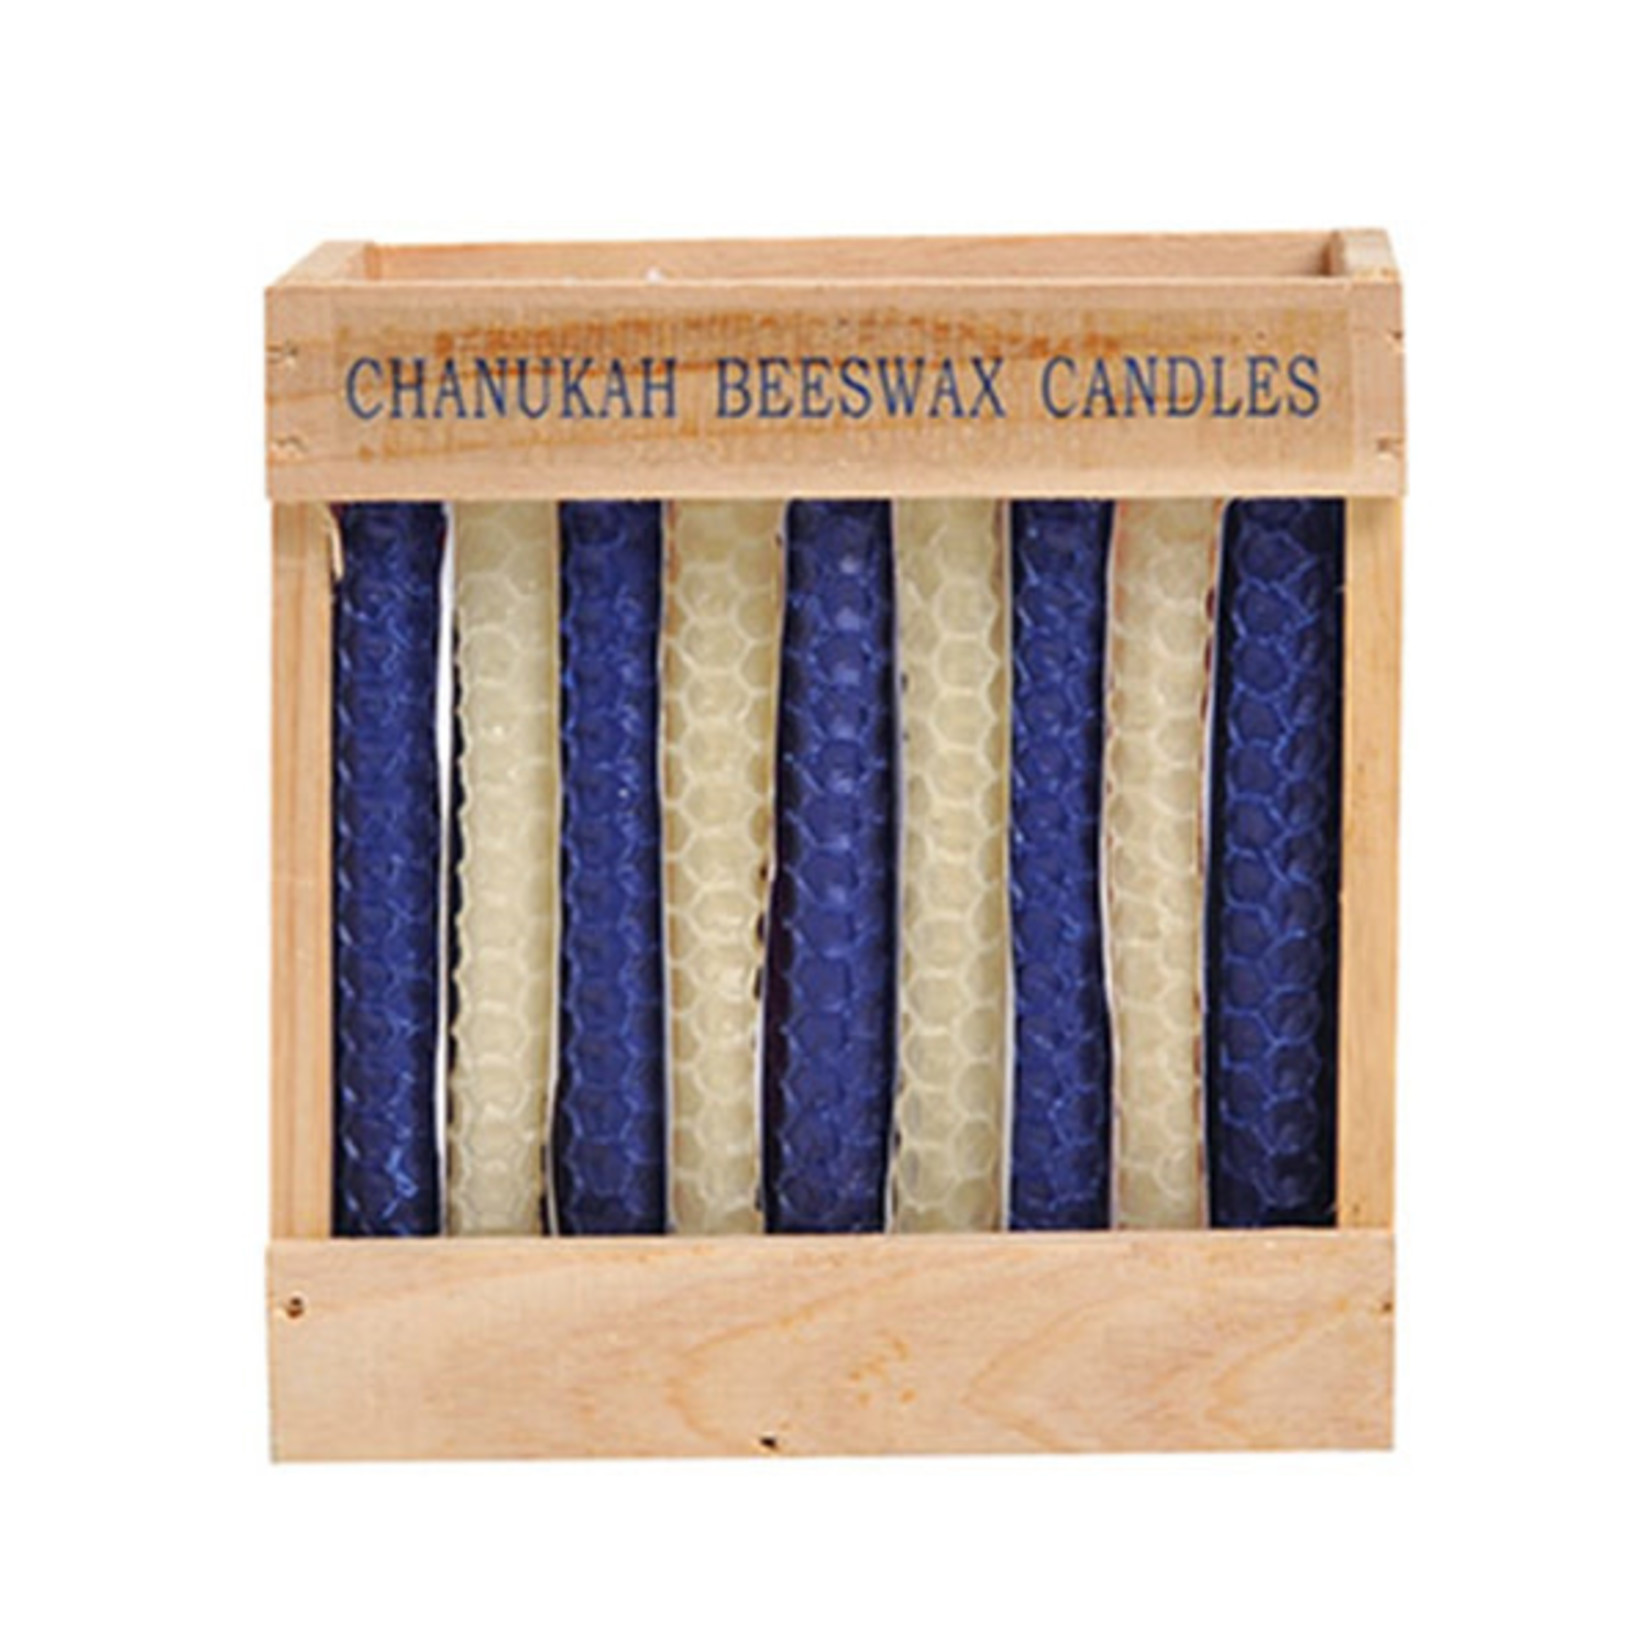 Beeswax Chanukah Candles-Blue&White